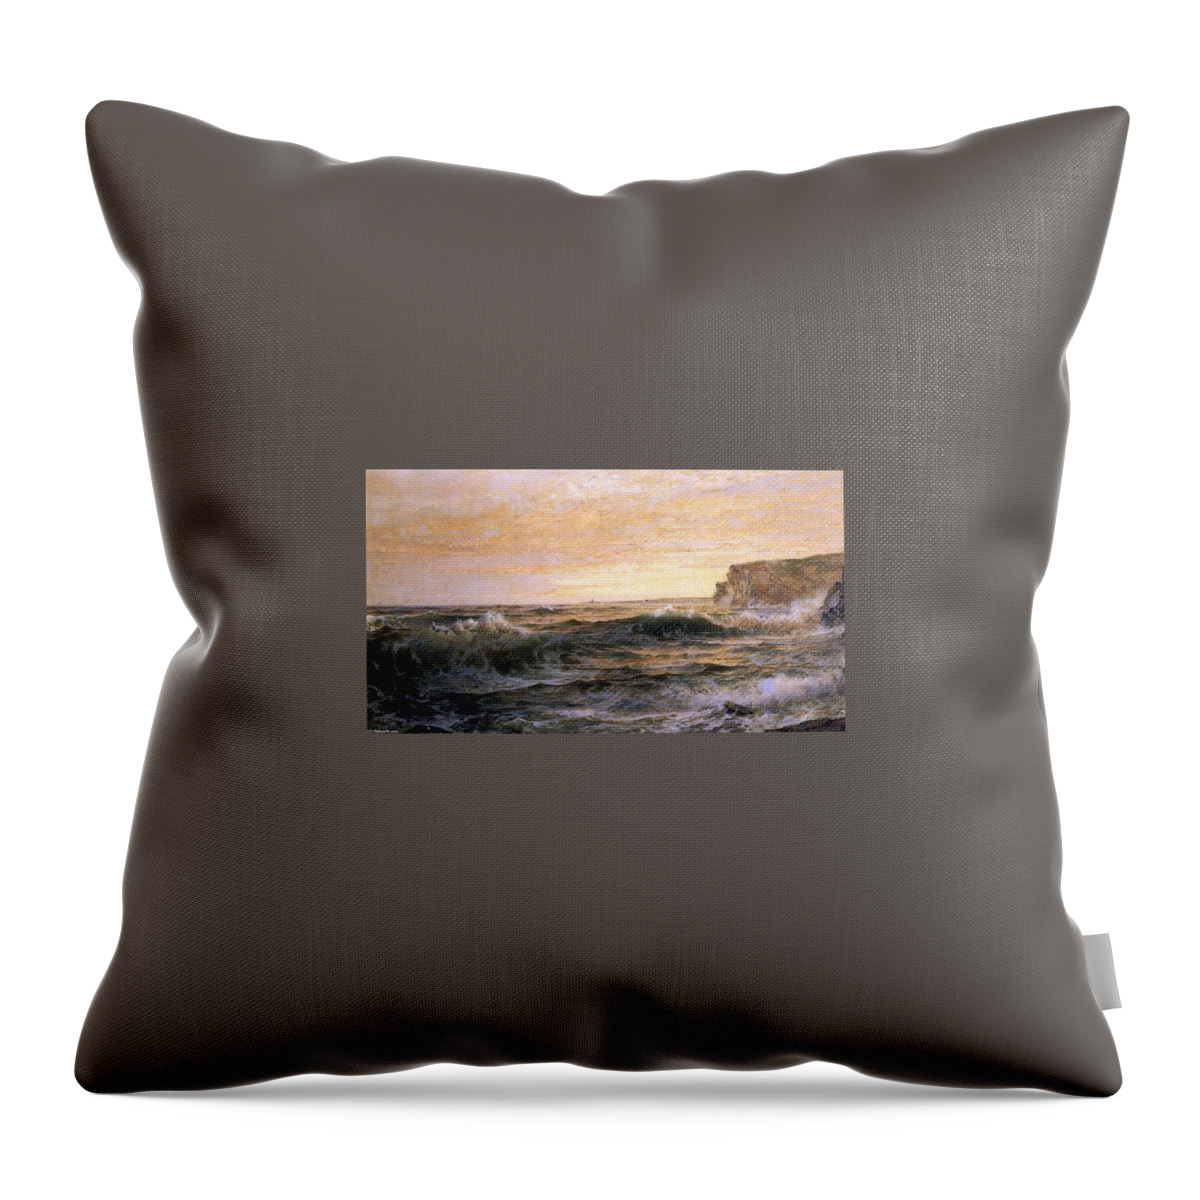 William-trost-richards-on-the-maine-coast Throw Pillow featuring the painting Richards On the Maine by William Trost